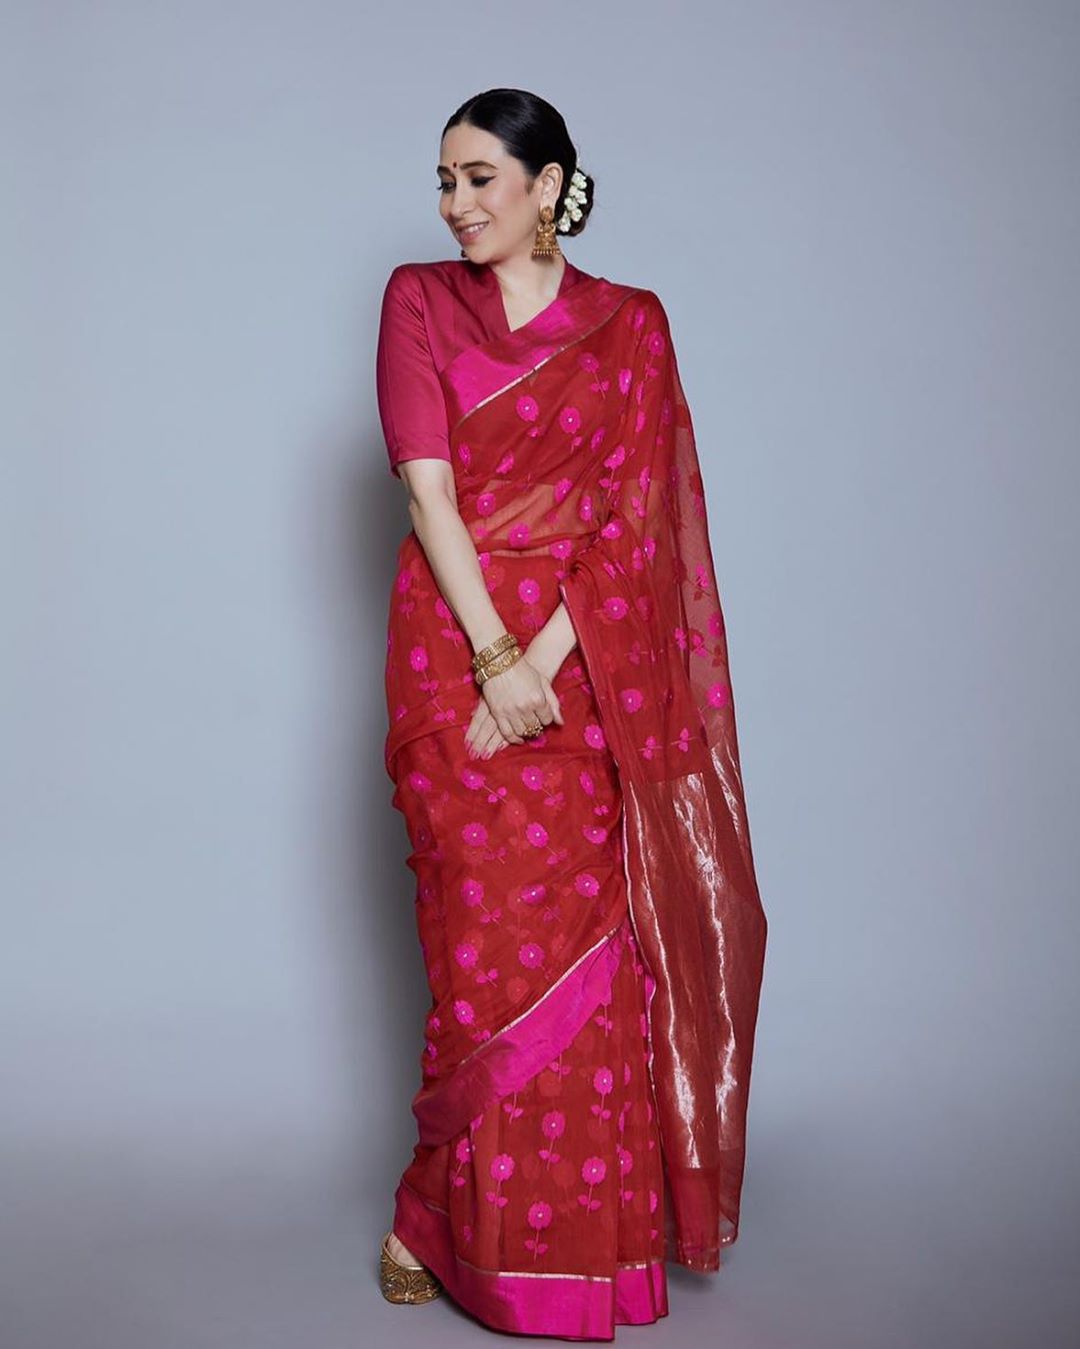 You are currently viewing Karishma Kapoor in Raw Mango Saree